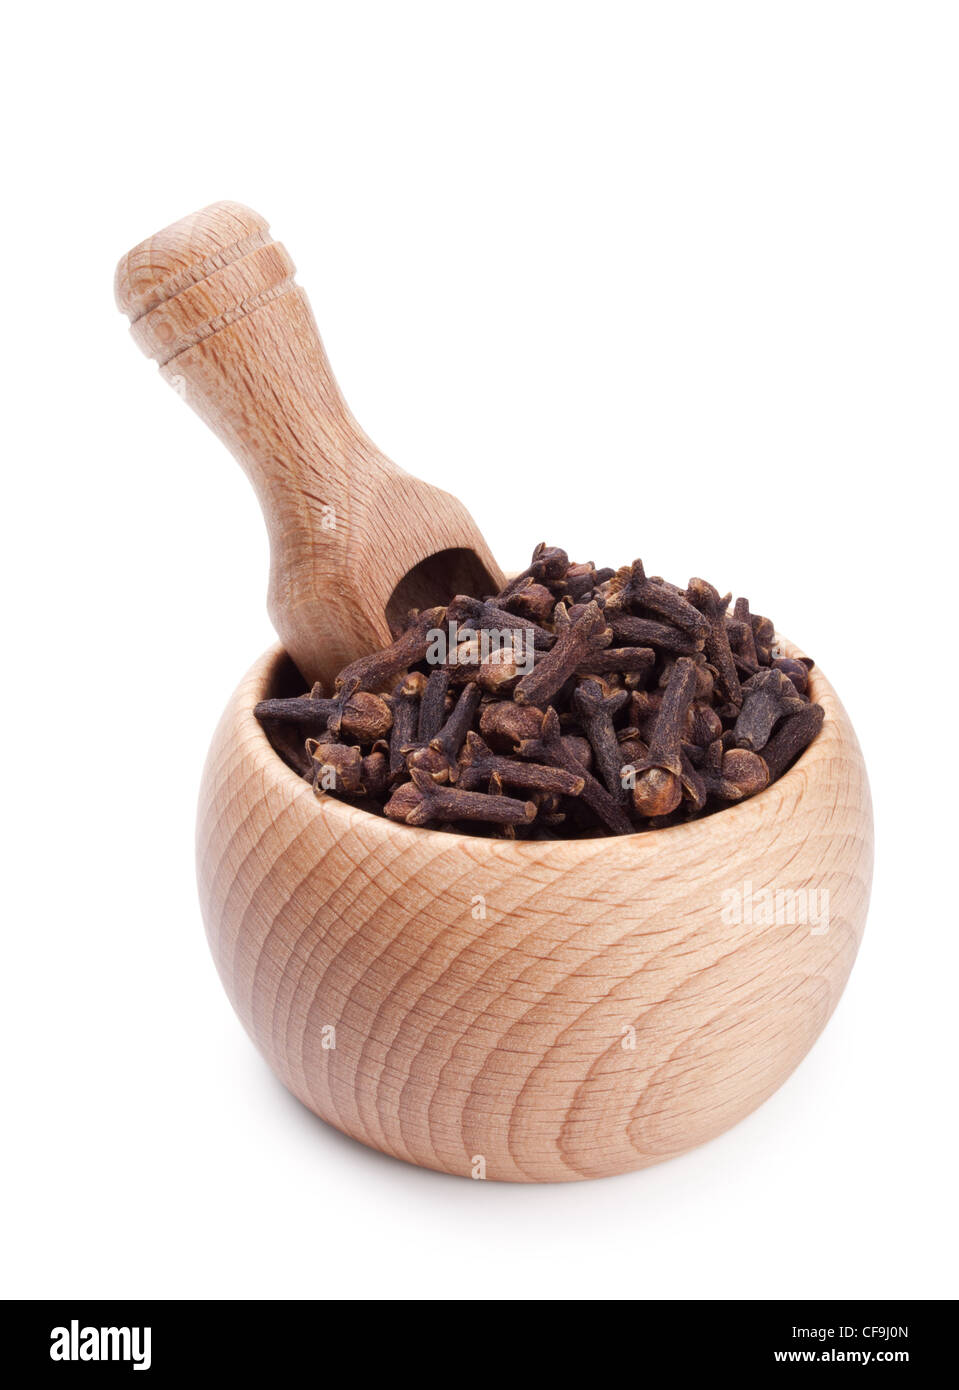 Wooden scoop in bowl full of cloves isolated on white background Stock Photo